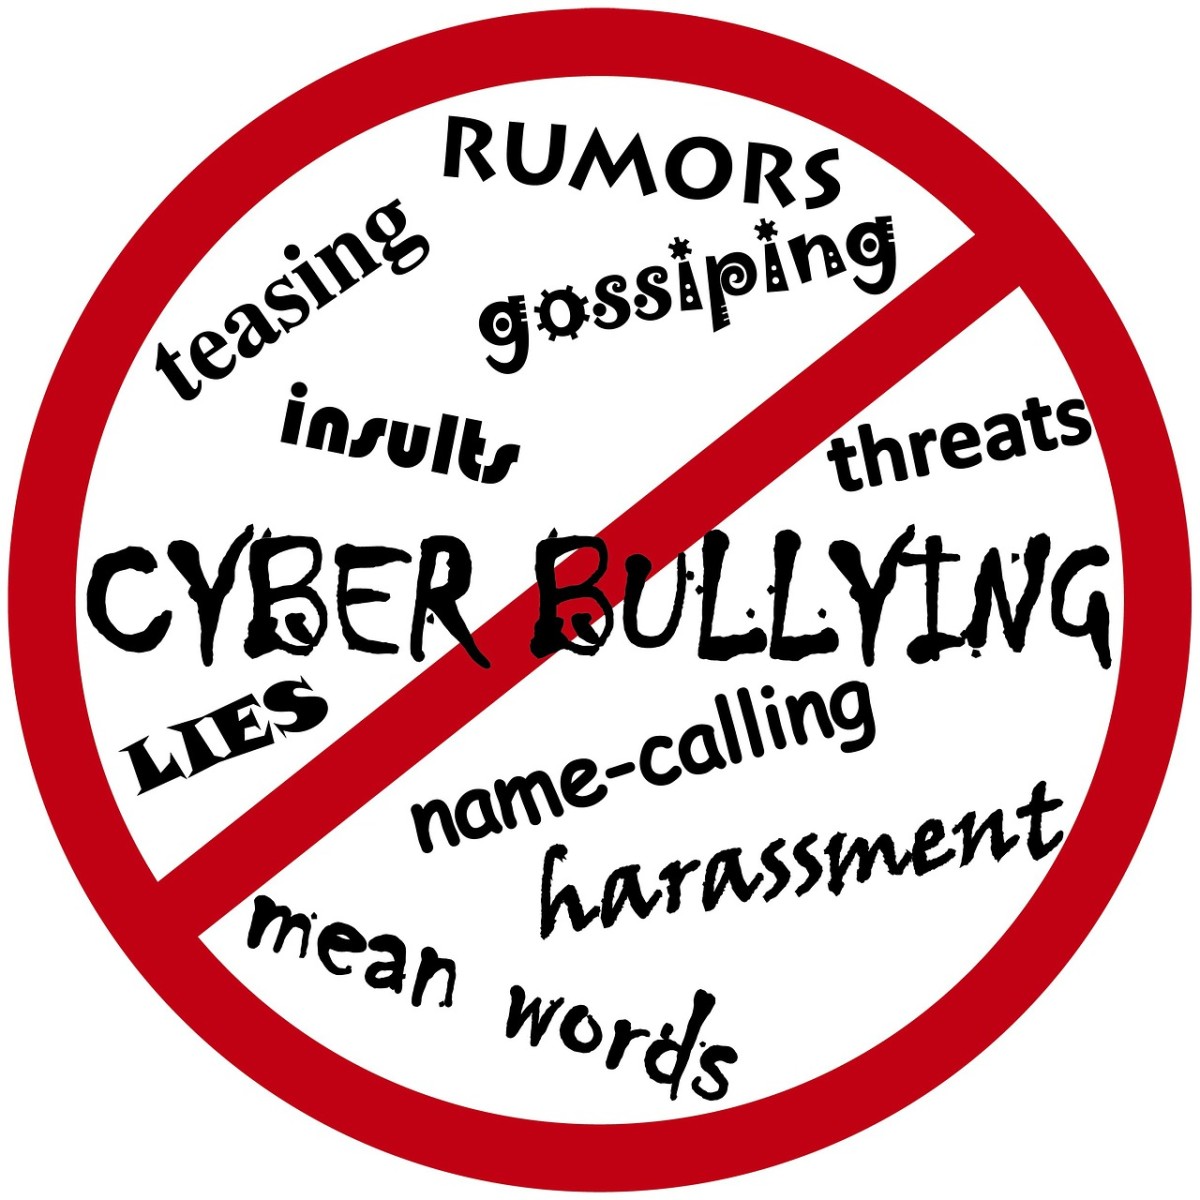 Online chats can be a source of cyber bullying.